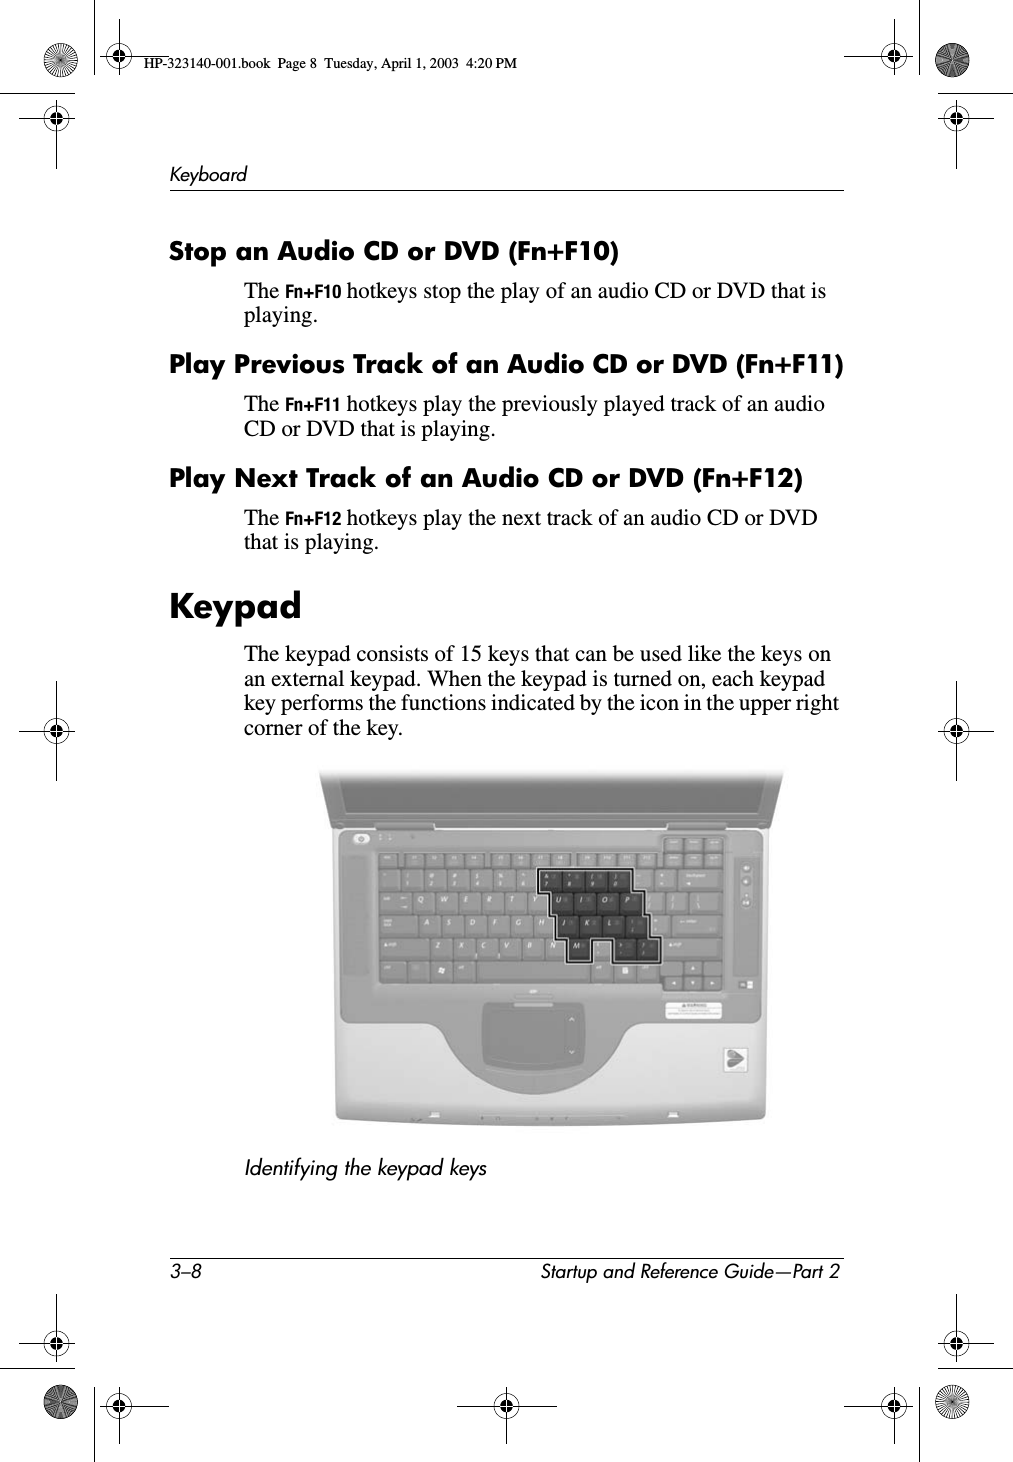 3–8 Startup and Reference Guide—Part 2KeyboardStop an Audio CD or DVD (Fn+F10)The Fn+F10 hotkeys stop the play of an audio CD or DVD that is playing.Play Previous Track of an Audio CD or DVD (Fn+F11)The Fn+F11 hotkeys play the previously played track of an audio CD or DVD that is playing.Play Next Track of an Audio CD or DVD (Fn+F12)The Fn+F12 hotkeys play the next track of an audio CD or DVD that is playing.KeypadThe keypad consists of 15 keys that can be used like the keys on an external keypad. When the keypad is turned on, each keypad key performs the functions indicated by the icon in the upper right corner of the key.Identifying the keypad keysHP-323140-001.book  Page 8  Tuesday, April 1, 2003  4:20 PM